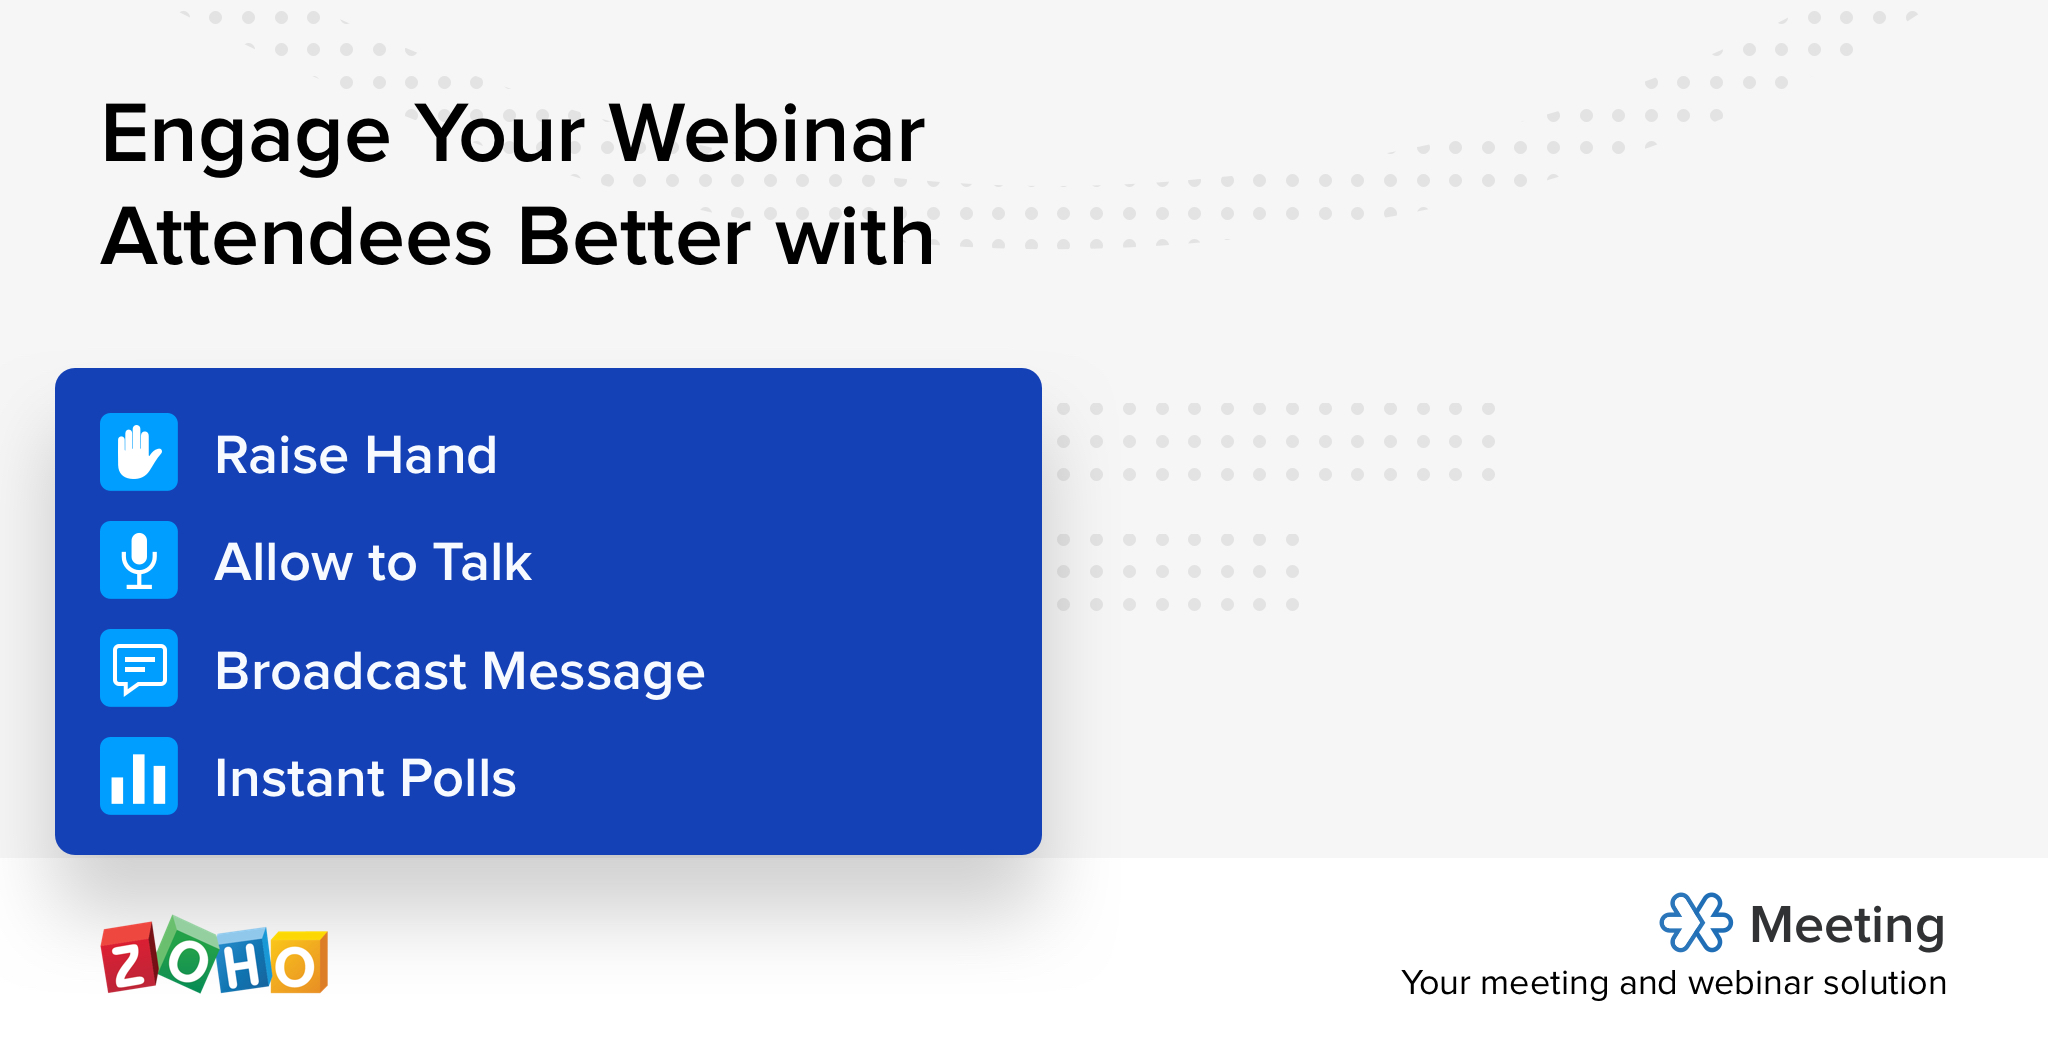 Engage Your Webinar Attendees Better with Raise Hand, Allow to Talk, Broadcast Message, and Instant Polls